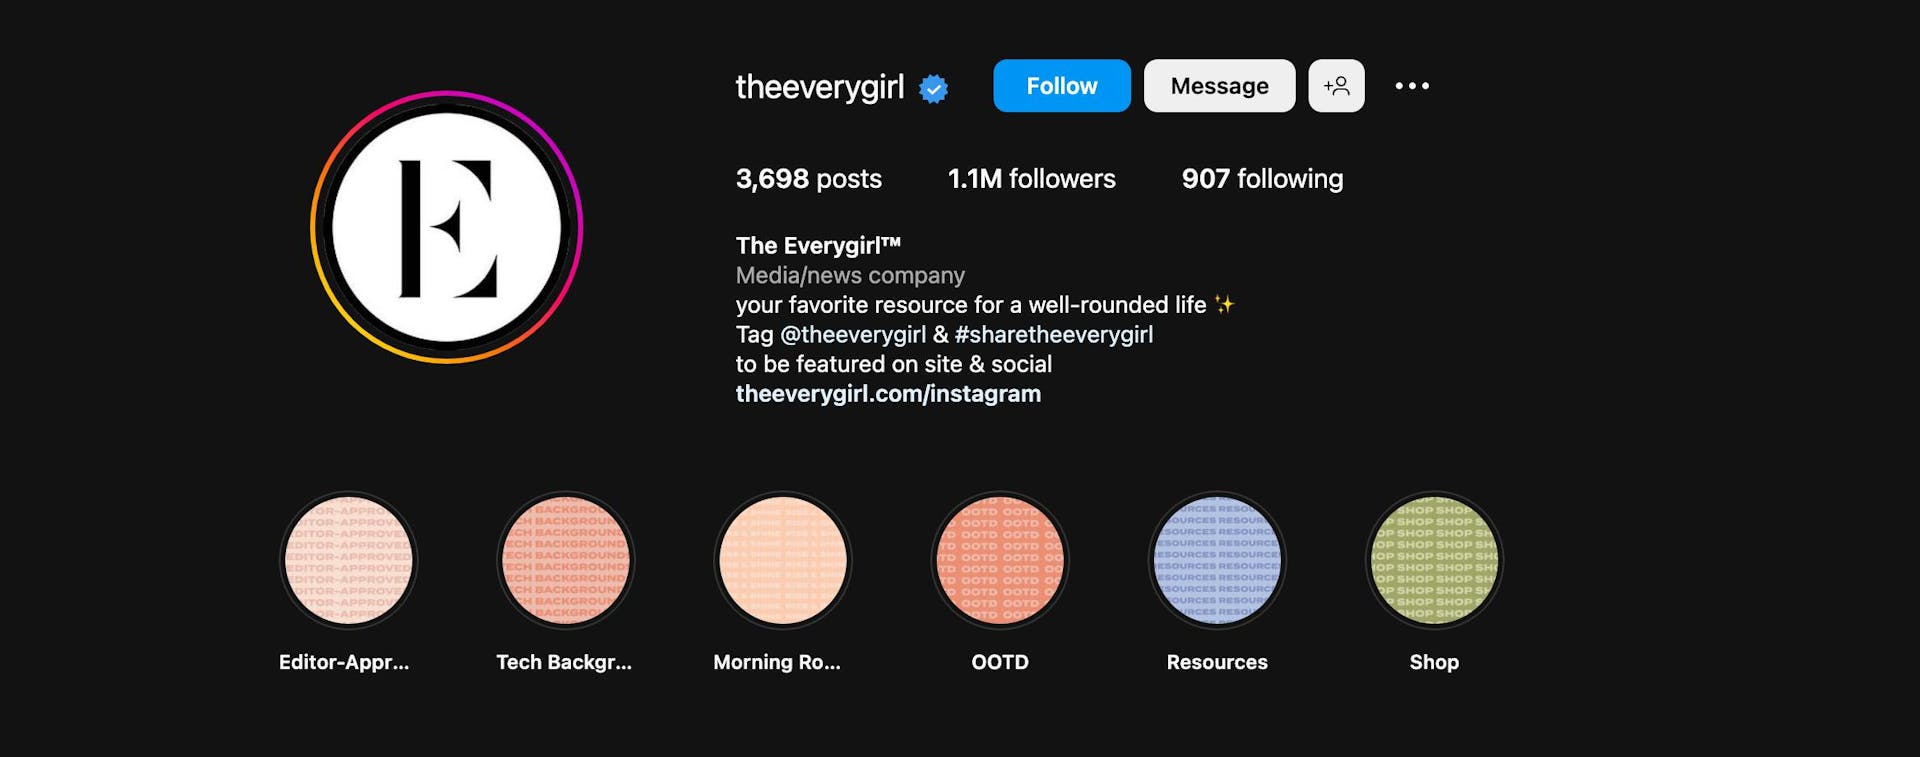 Screenshot of theeverygirl's Instagram profile for UGC